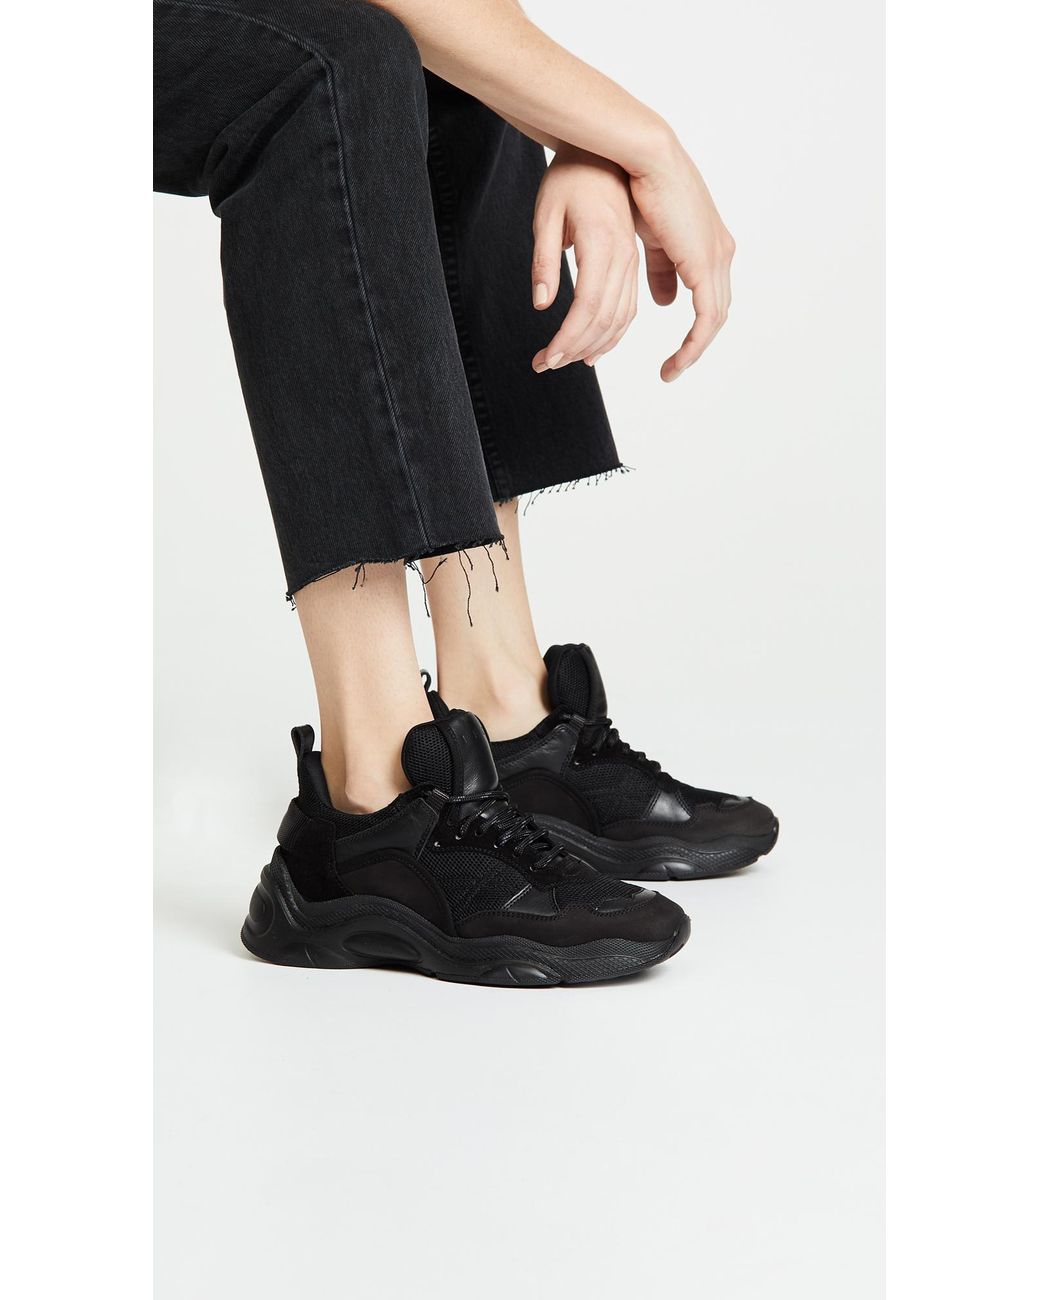 IRO Leather Curverunner Sneakers in Black | Lyst